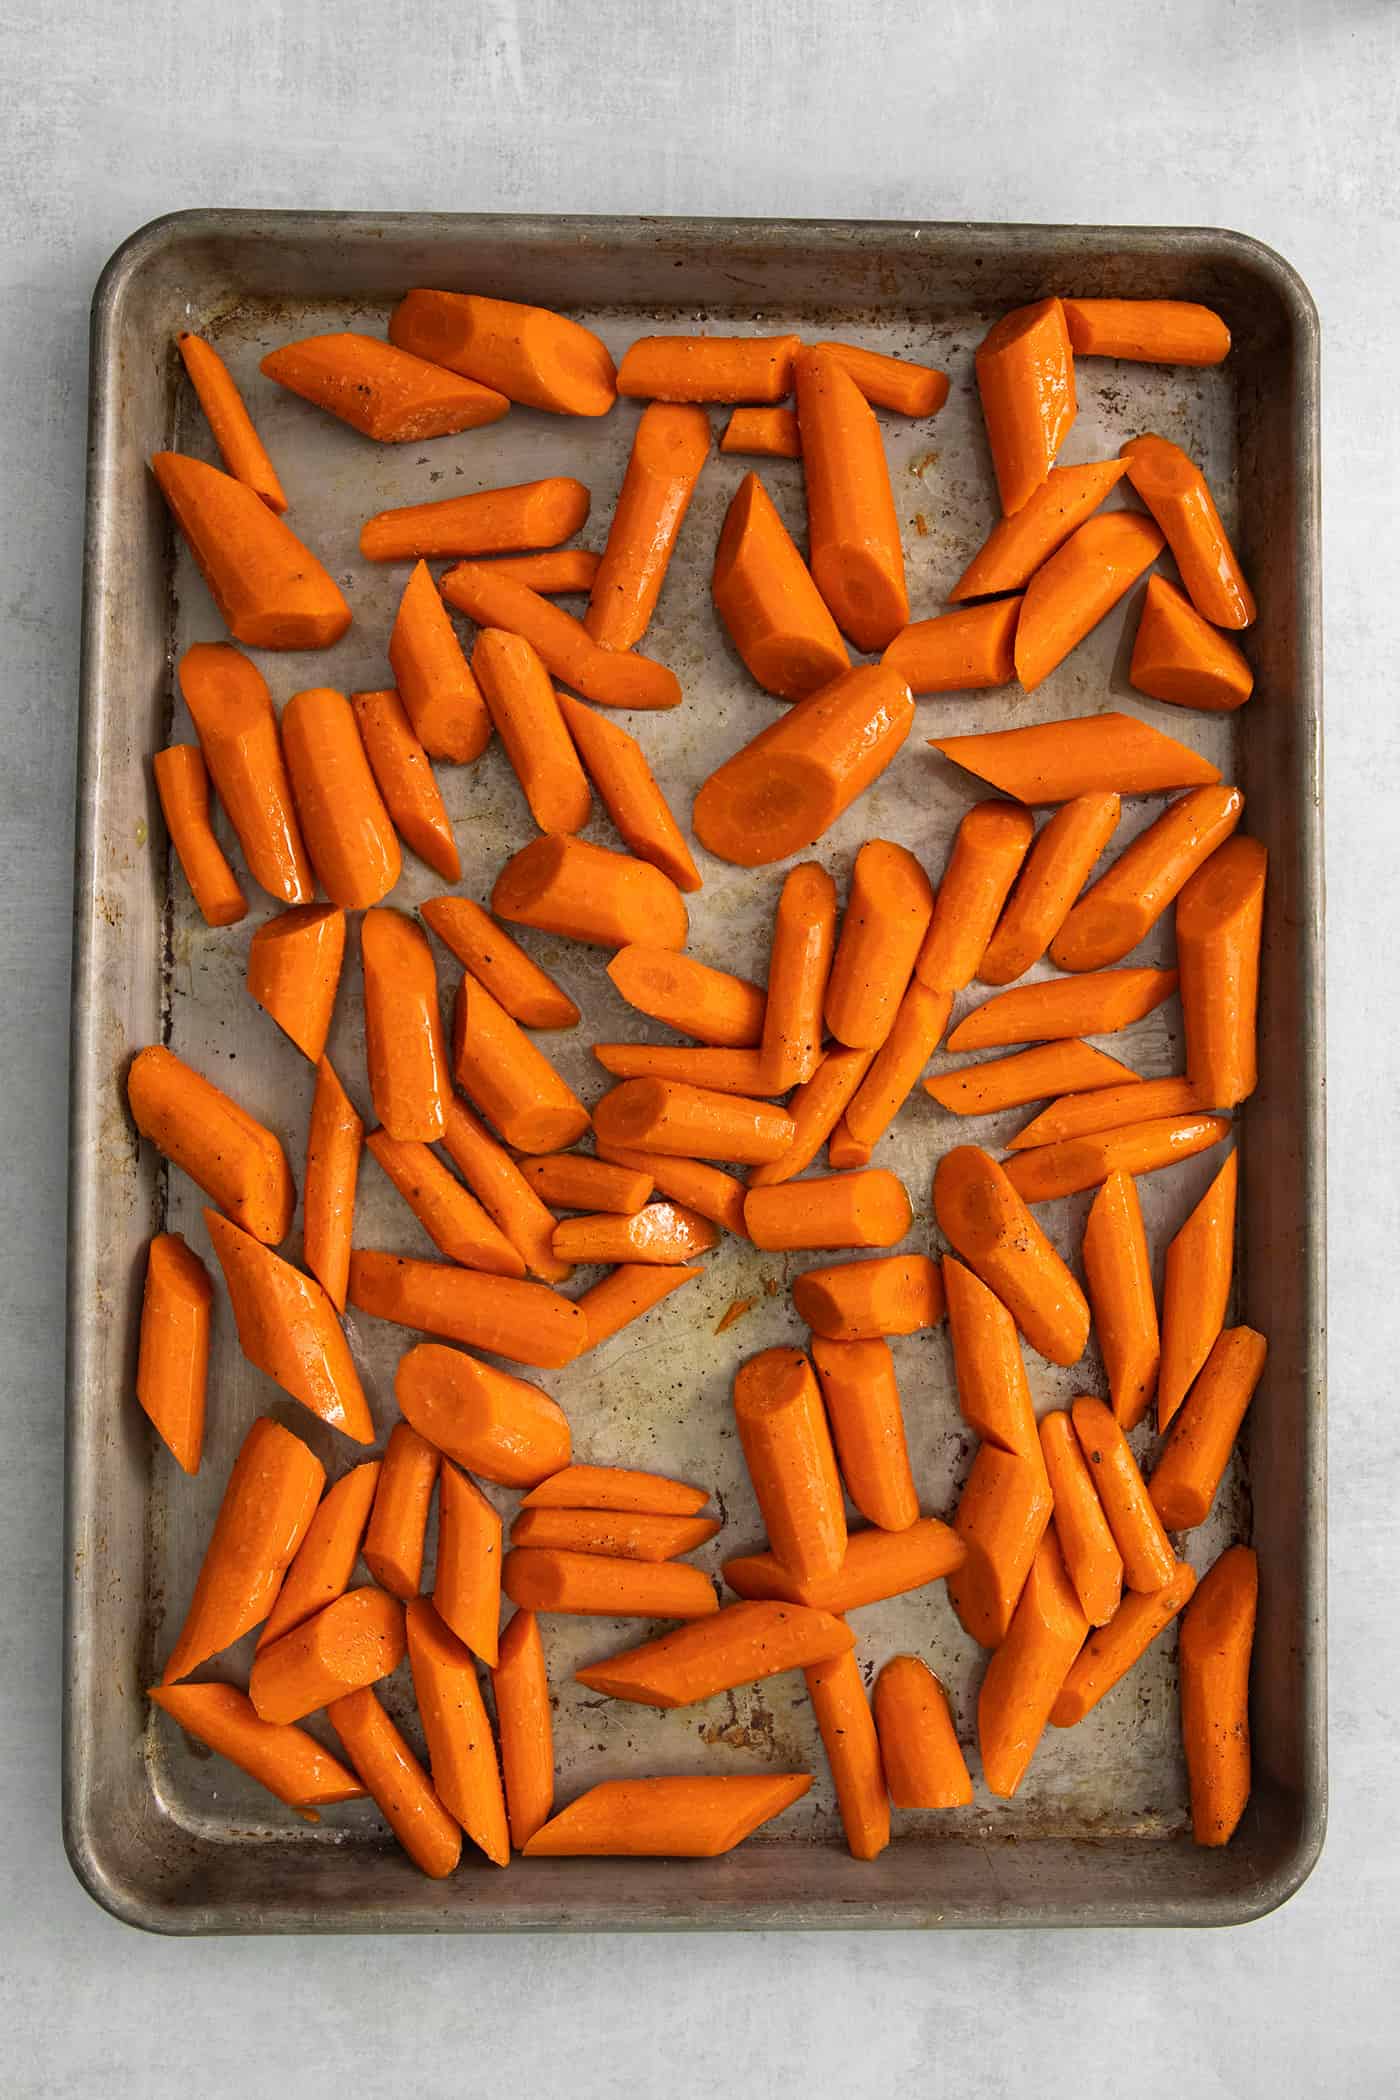 Pieces of carrots spread on a baking sheet